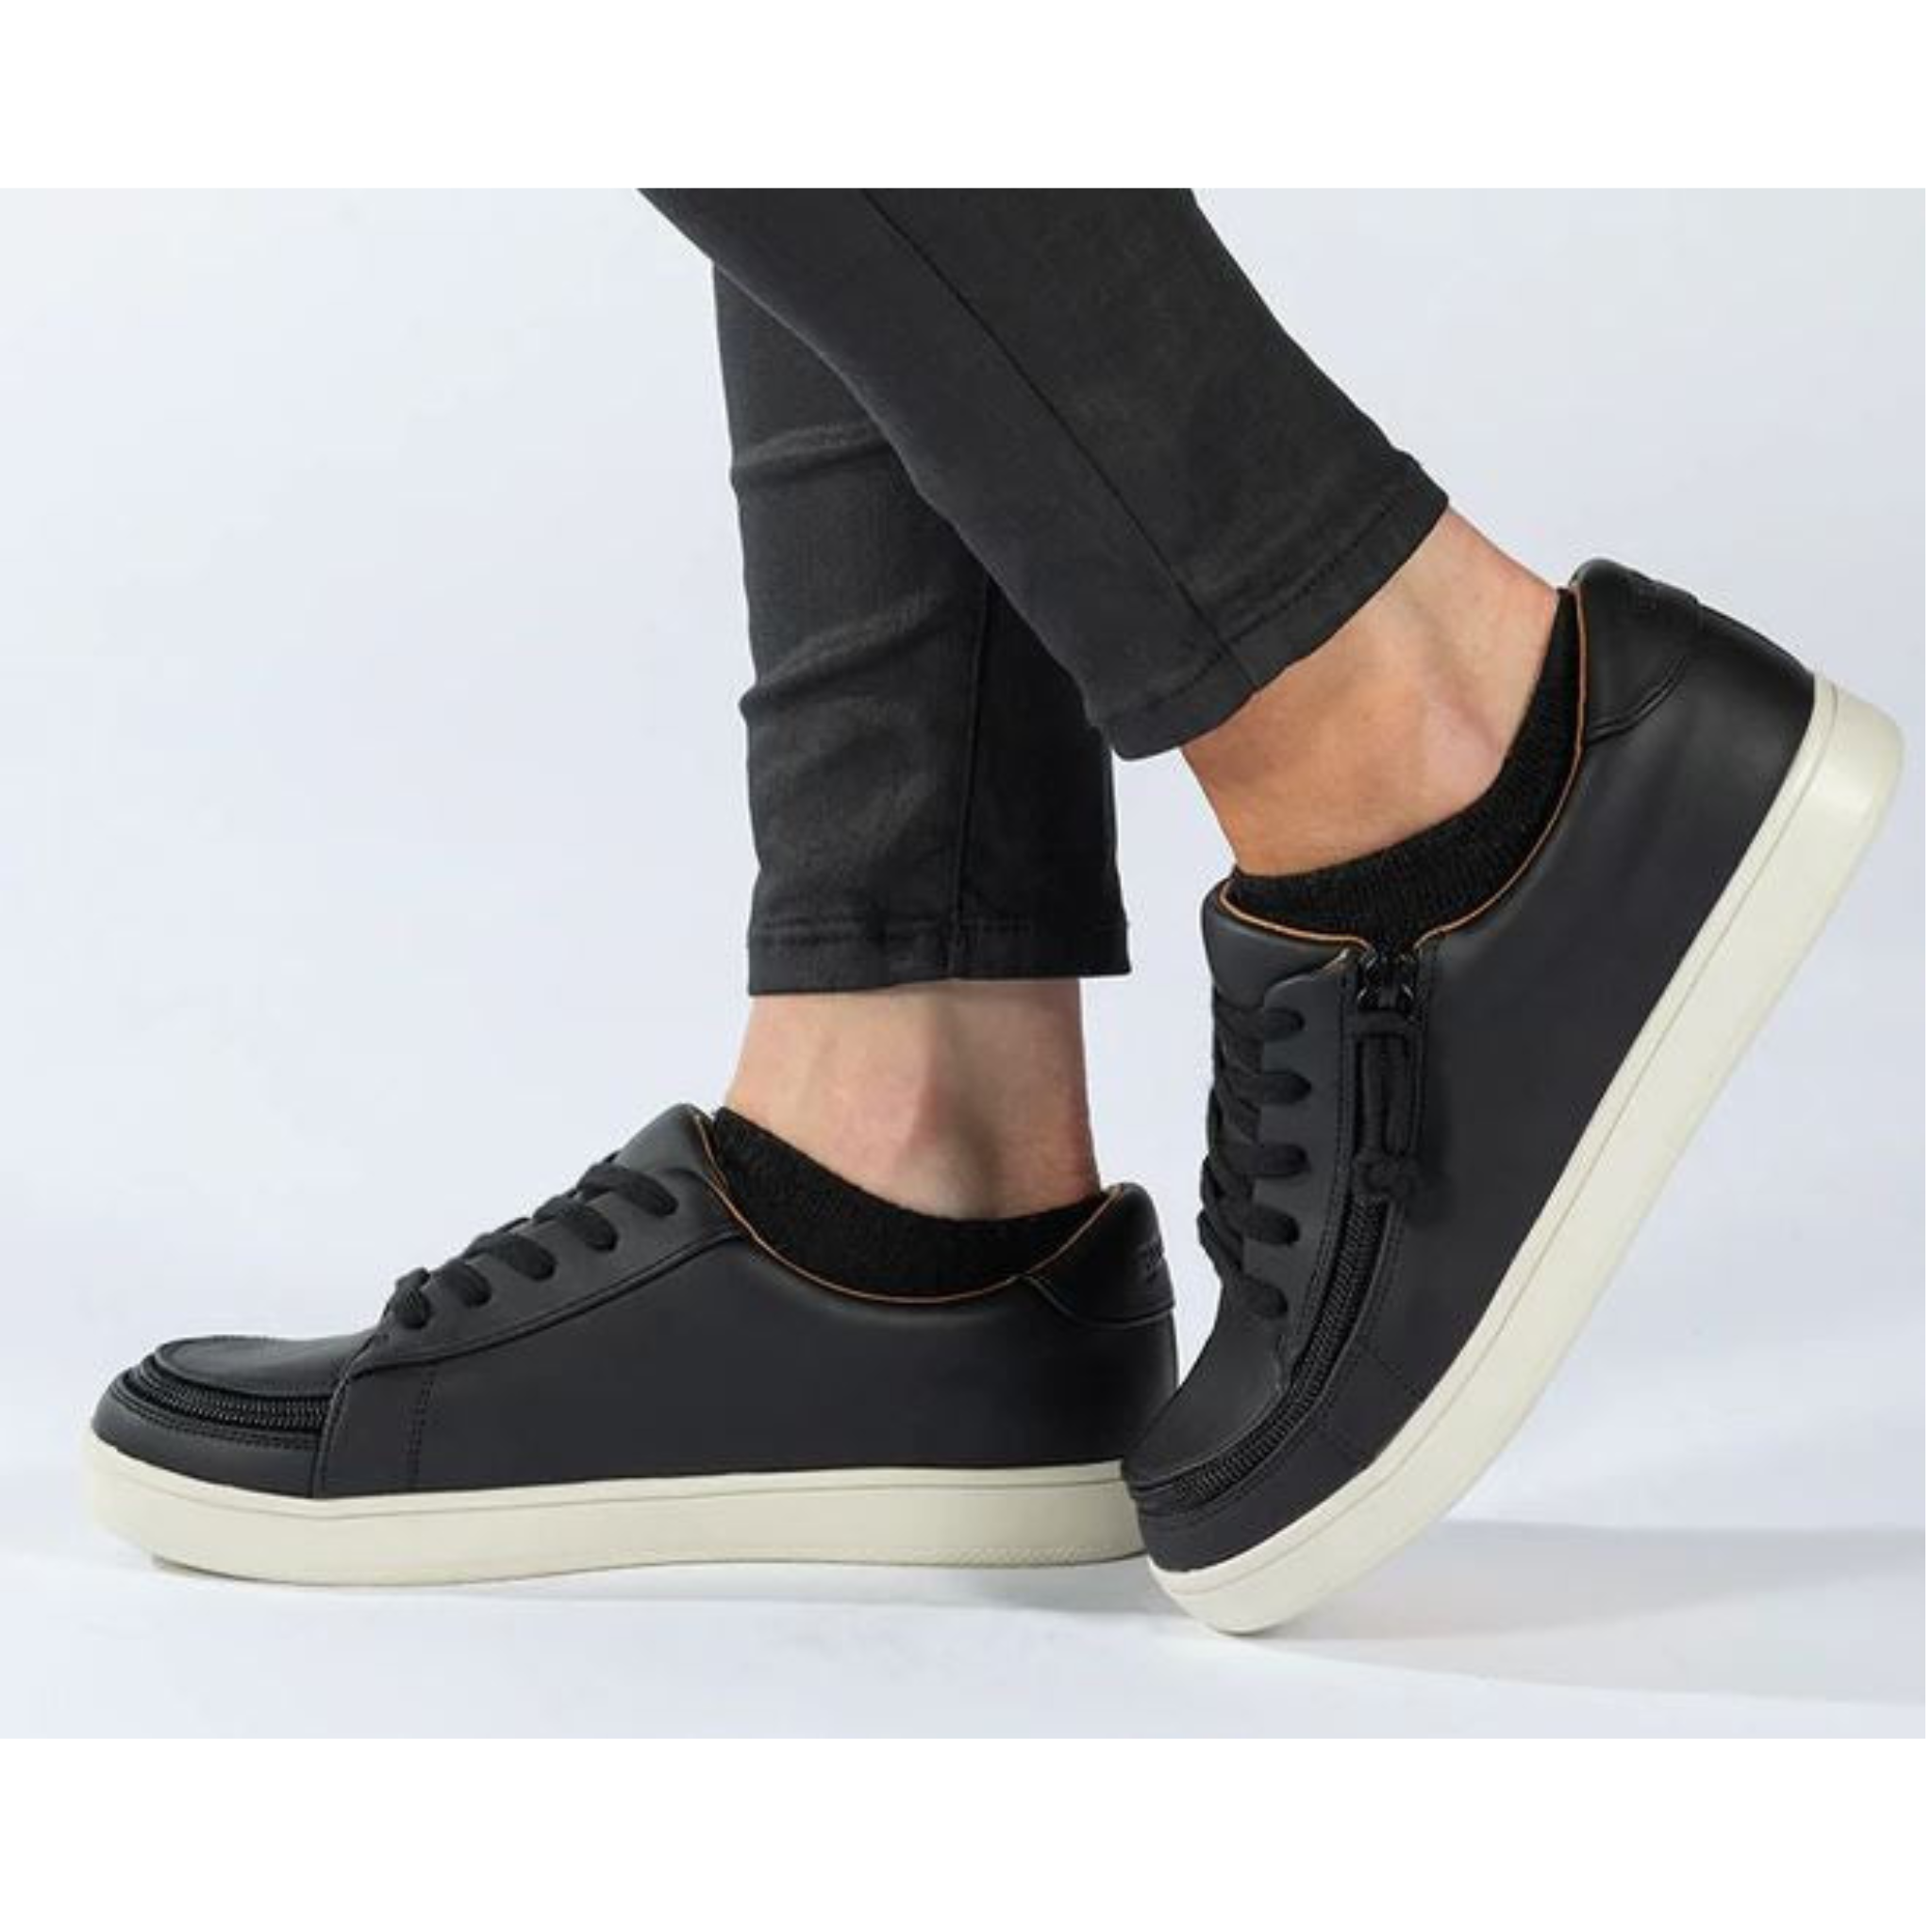 Billy Footwear (Womens) - Low Top Faux Leather Black/White Stitch Shoes